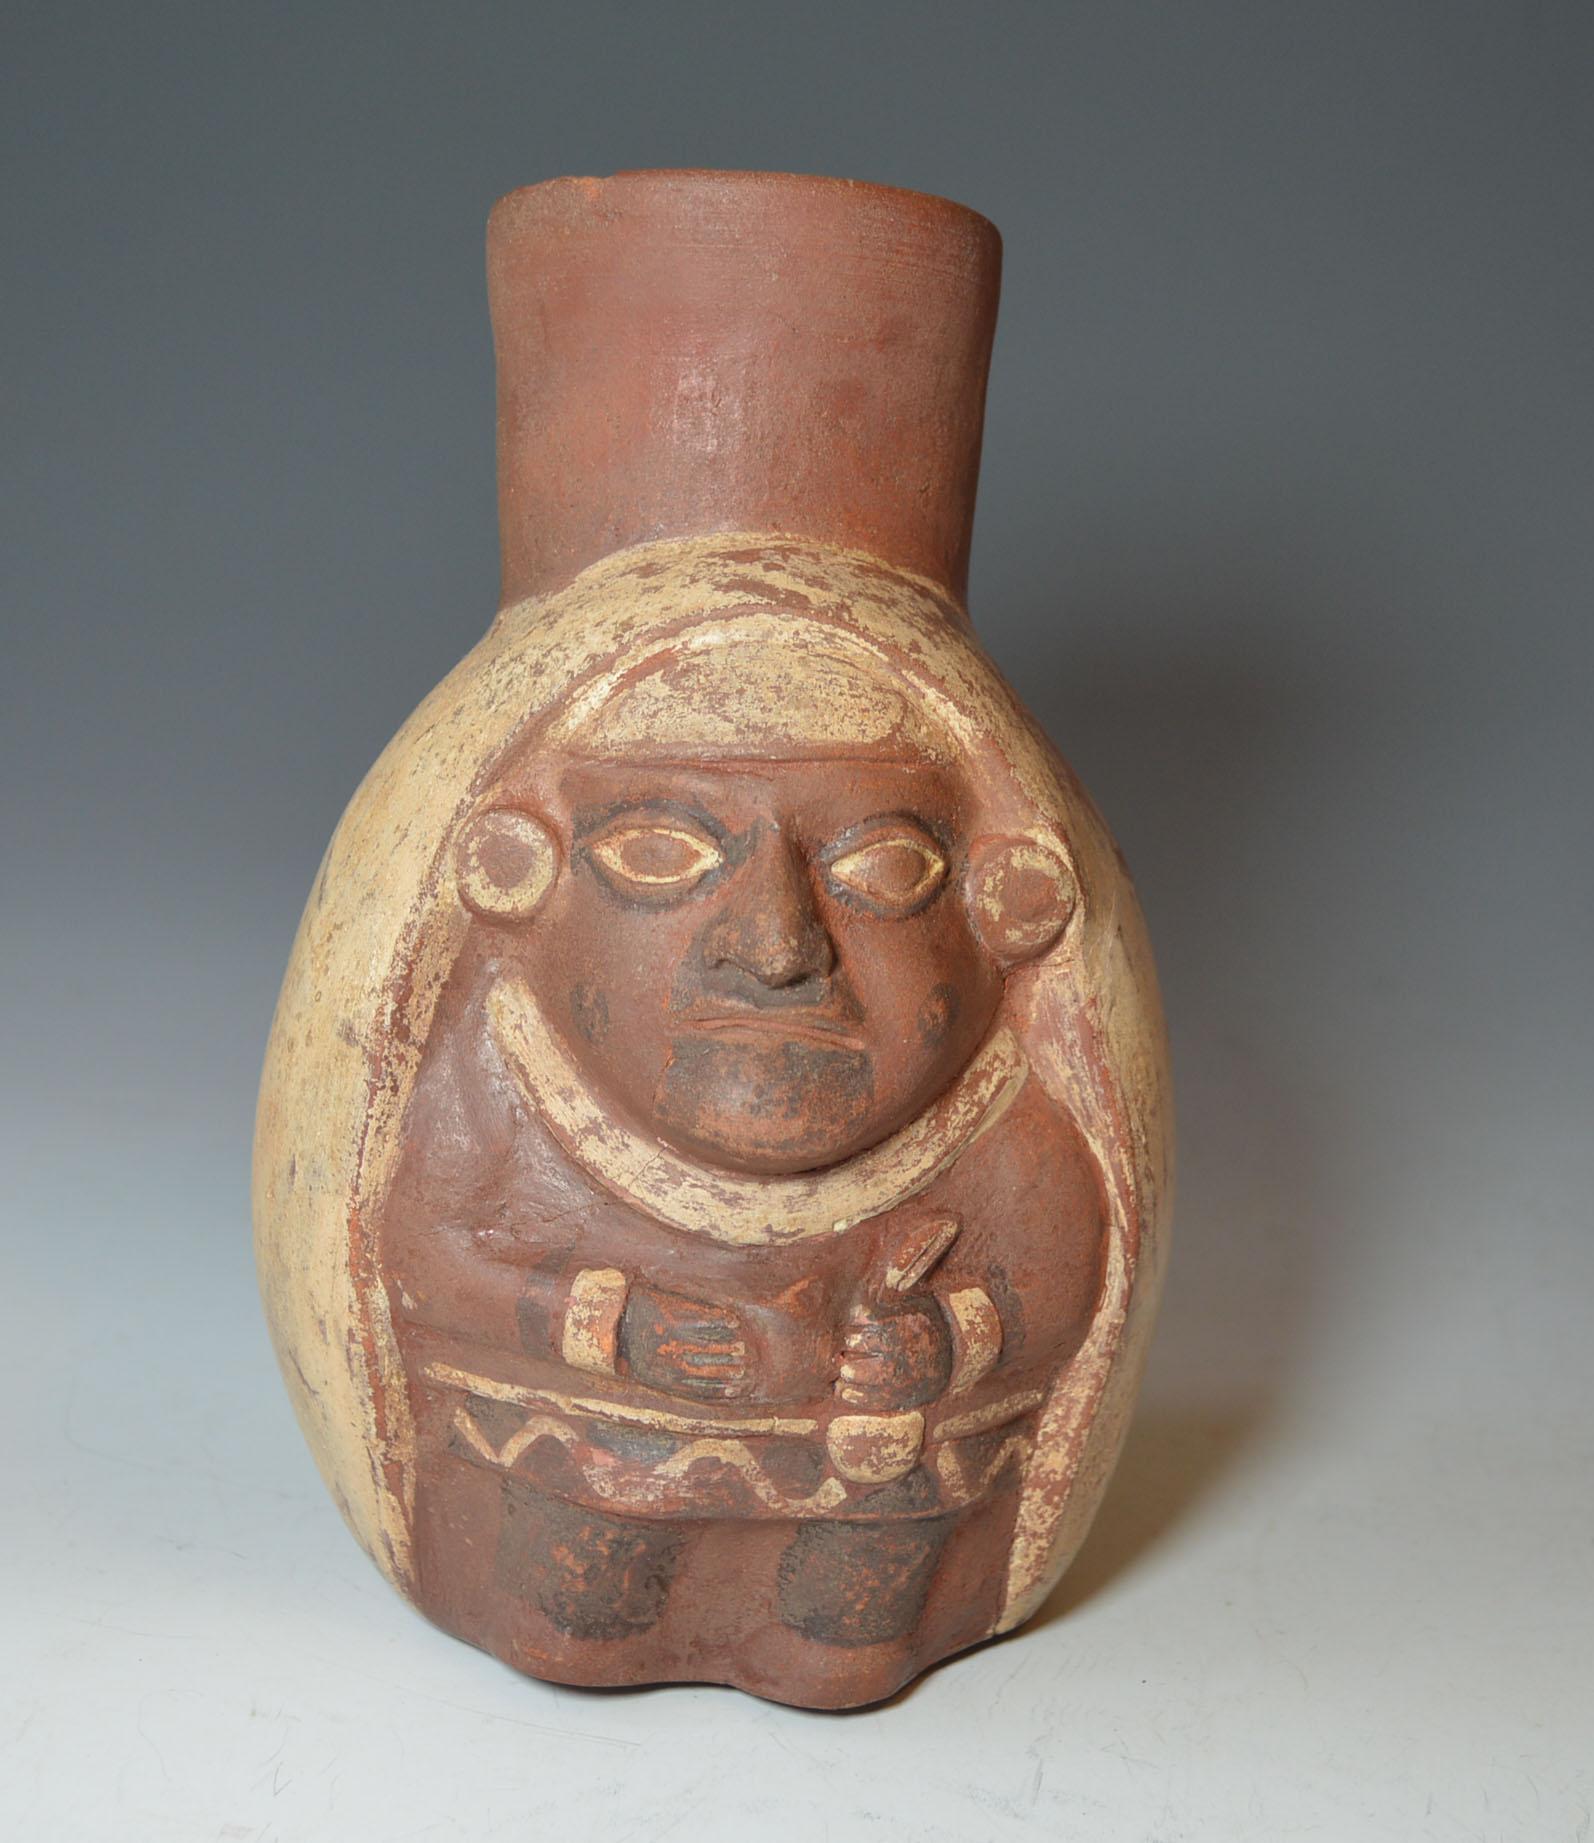 Pre Columbian Art.
A fine Moche vessel of a important personage or dignitary.
Moche 1V period circa 400-600 AD Peru.
Condition: stable stress cracks, minor restorations to base,
Size Height 26 cm, width 18 cm.
Ex UK collection acquired before